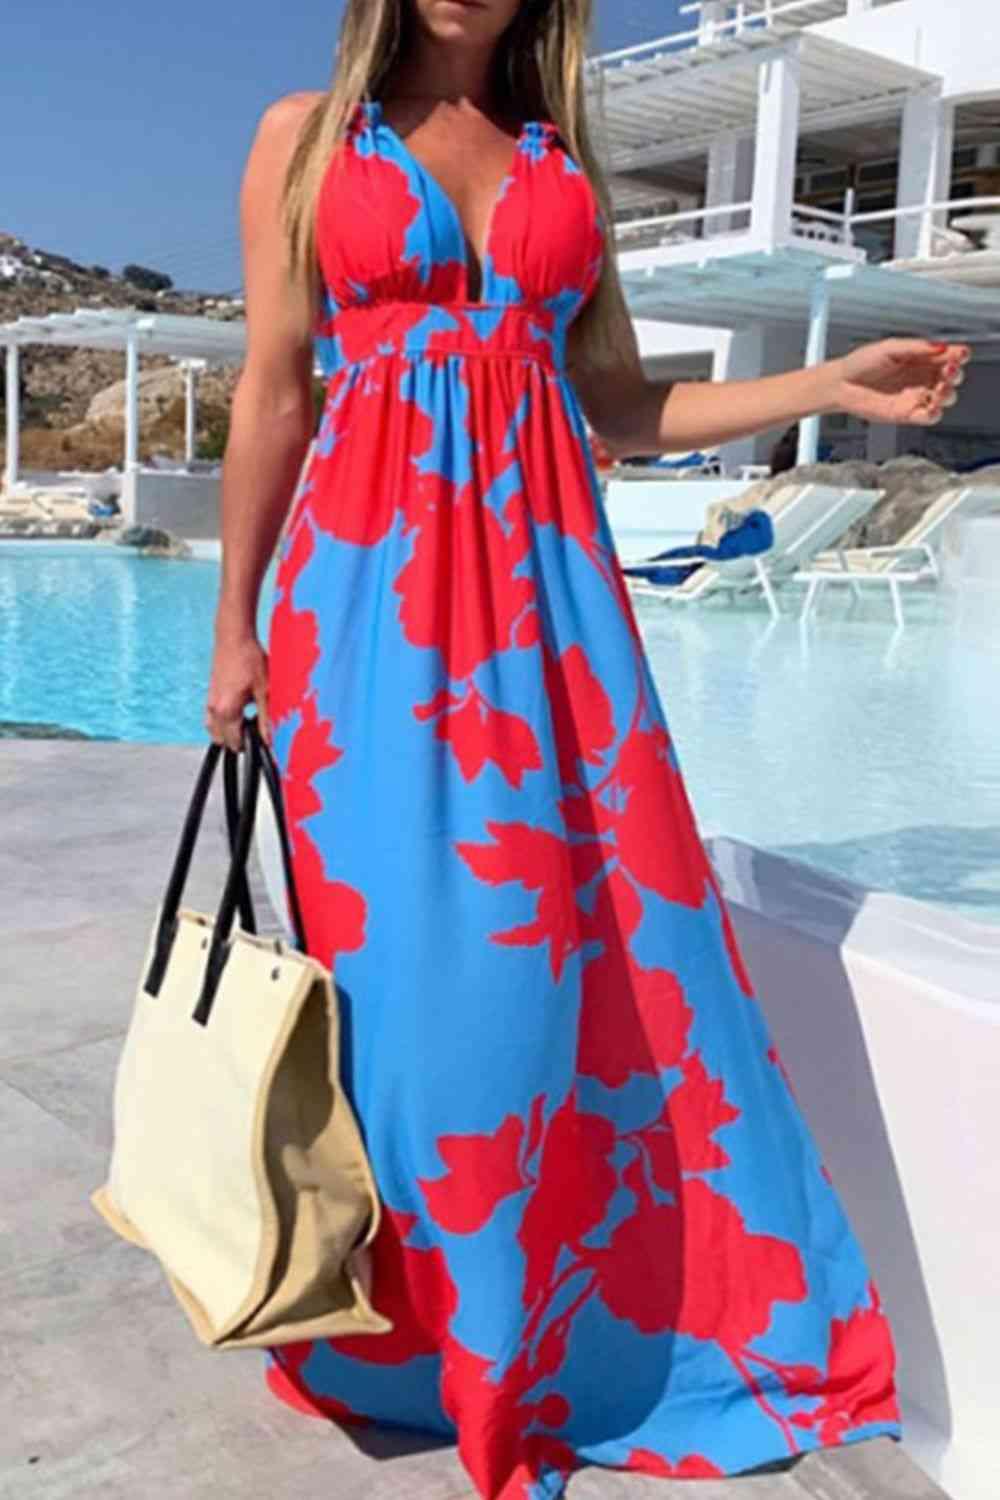 a woman in a blue and red dress standing next to a pool